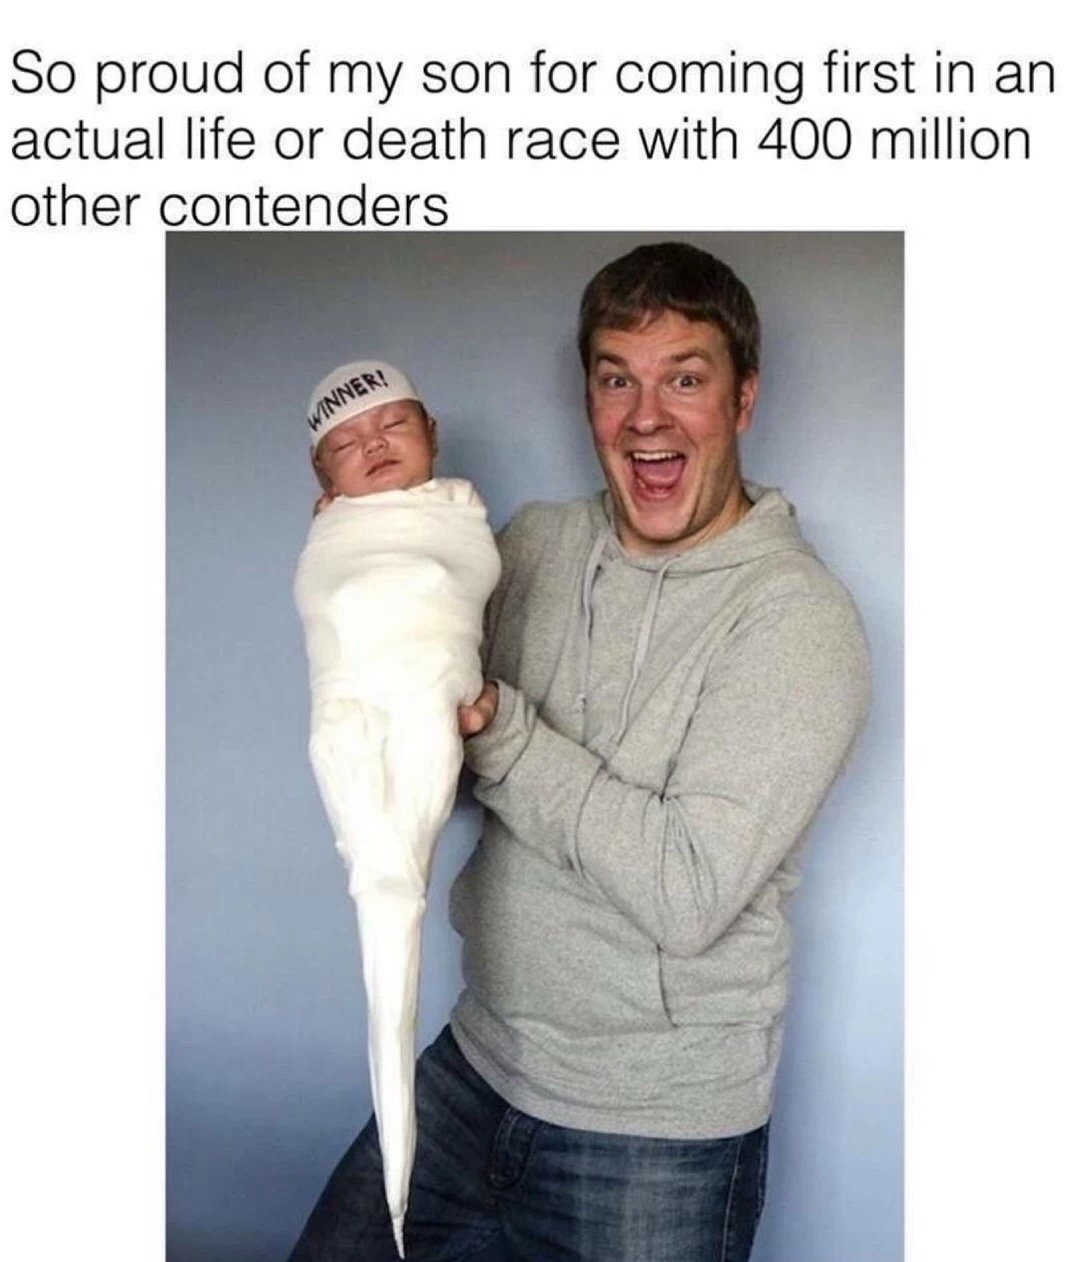 man congratulating his child for winning a life or death race with 400 million other contenders.